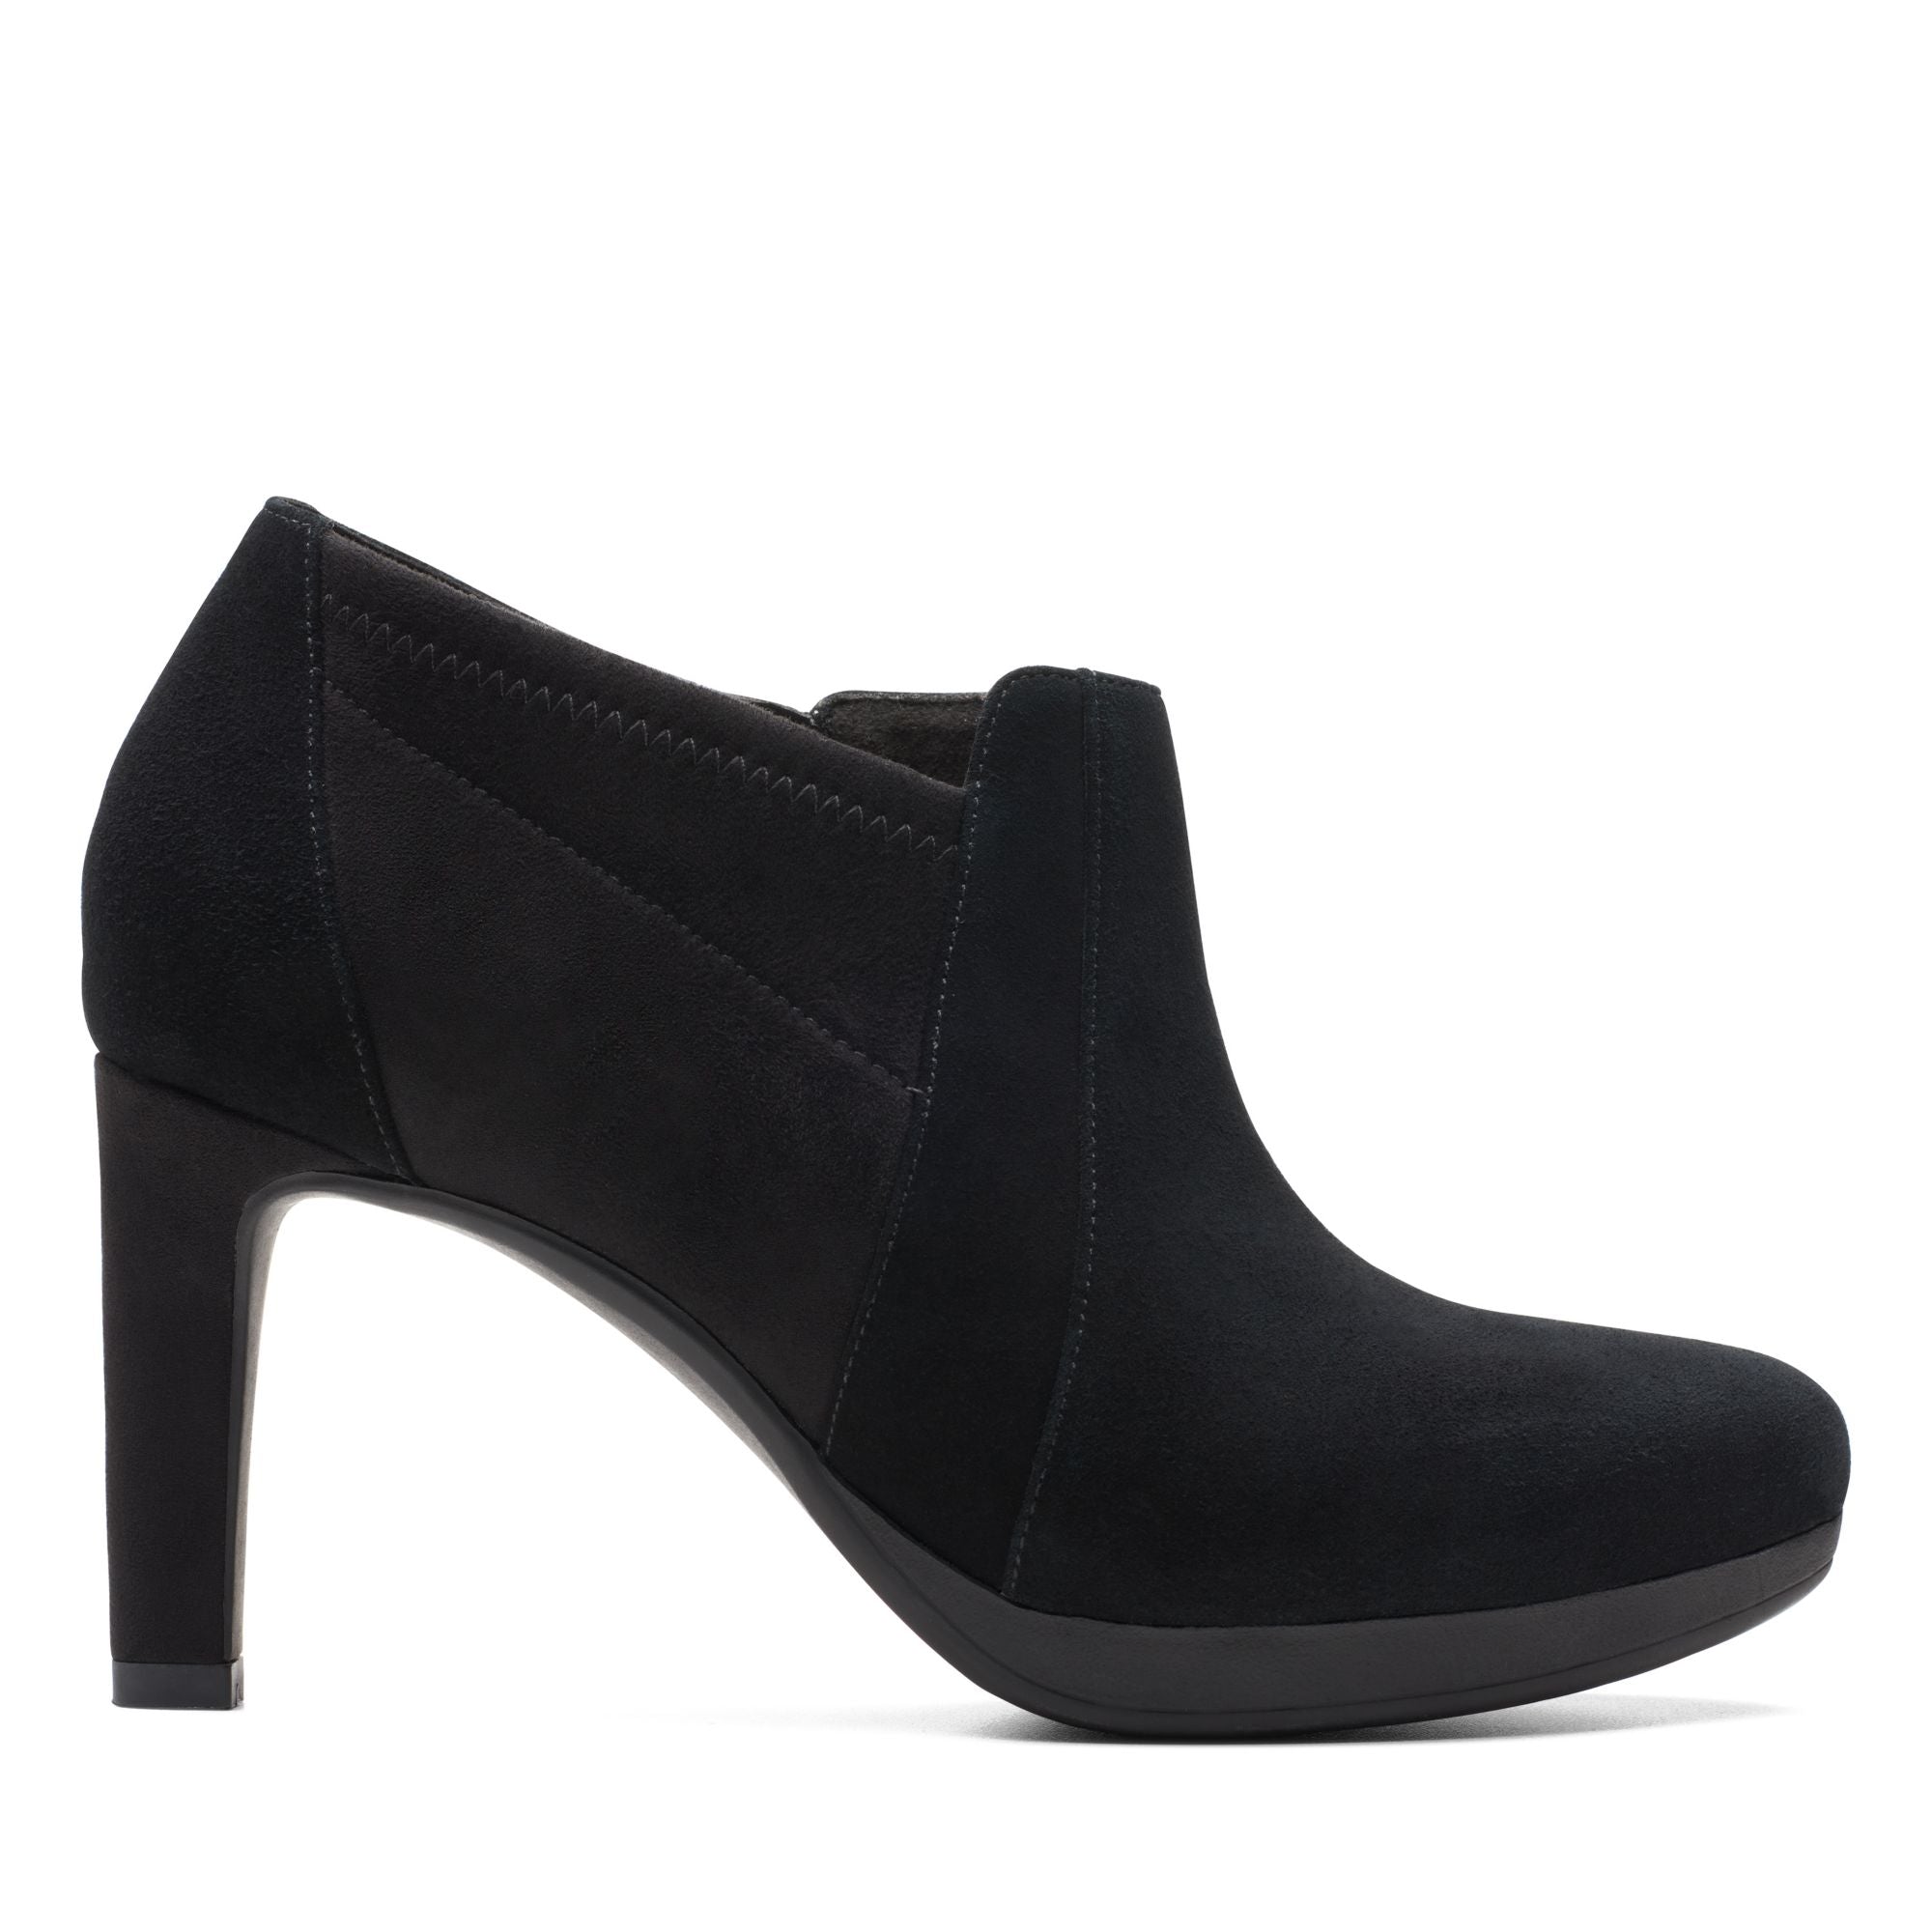 Ambyr Hope Black Suede - Clarks Canada Official Site | Clarks Shoes